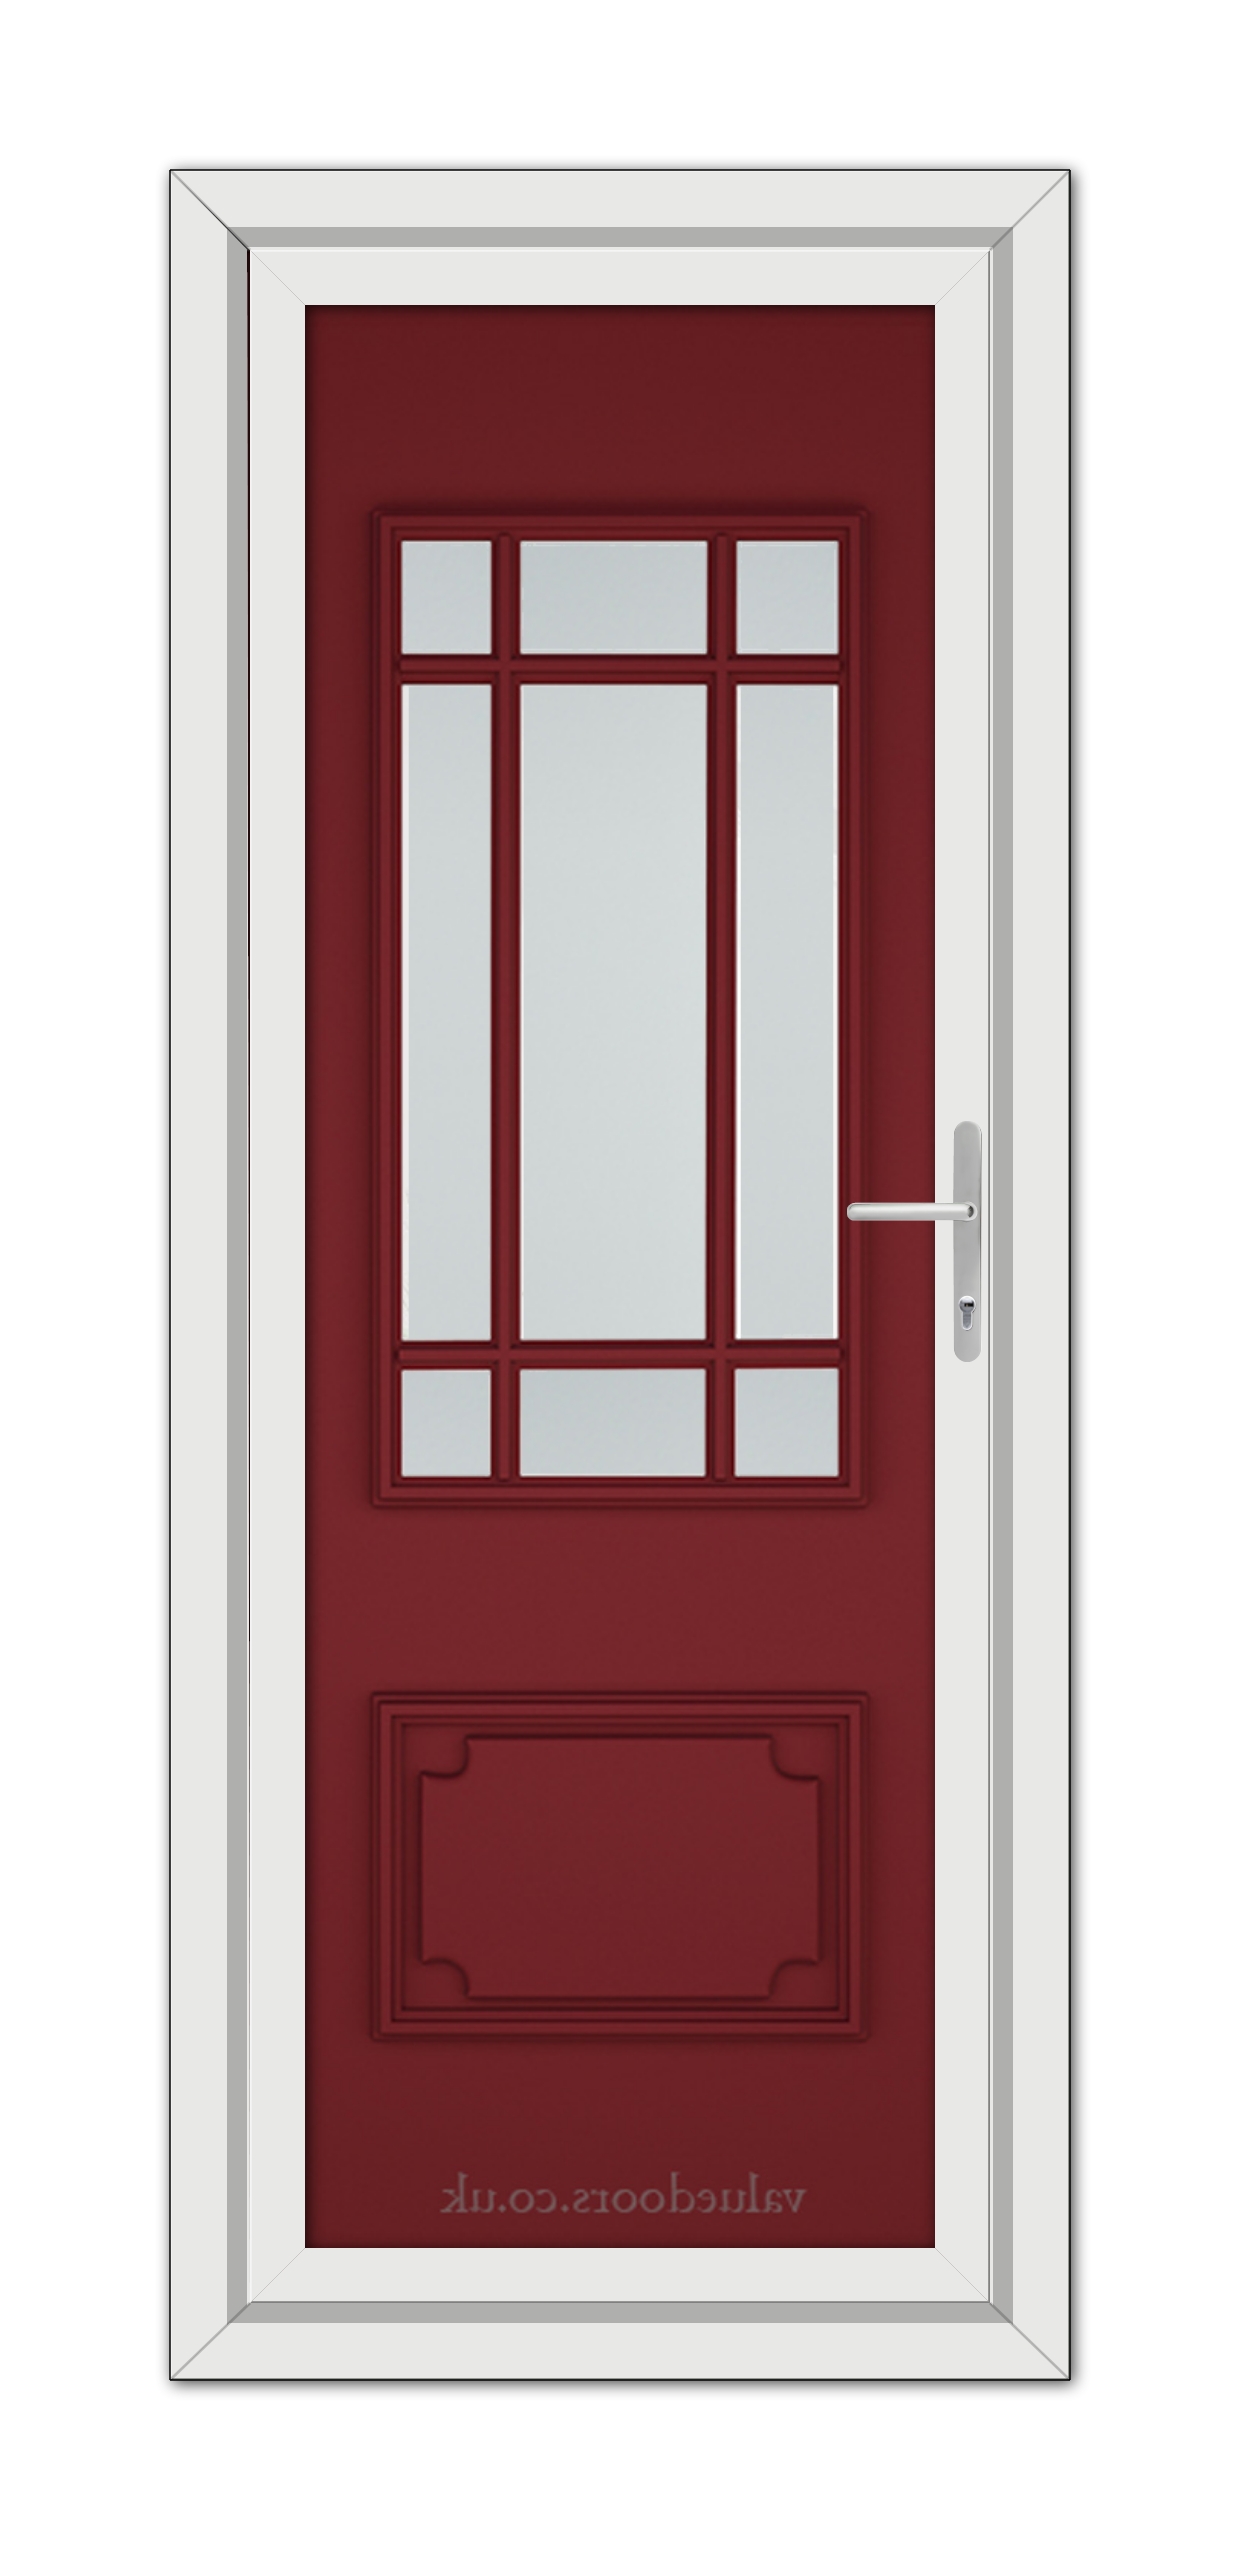 A vertical image of a closed, Red Seville uPVC Door with a white frame, featuring a rectangular glass panel with white grids at the top.